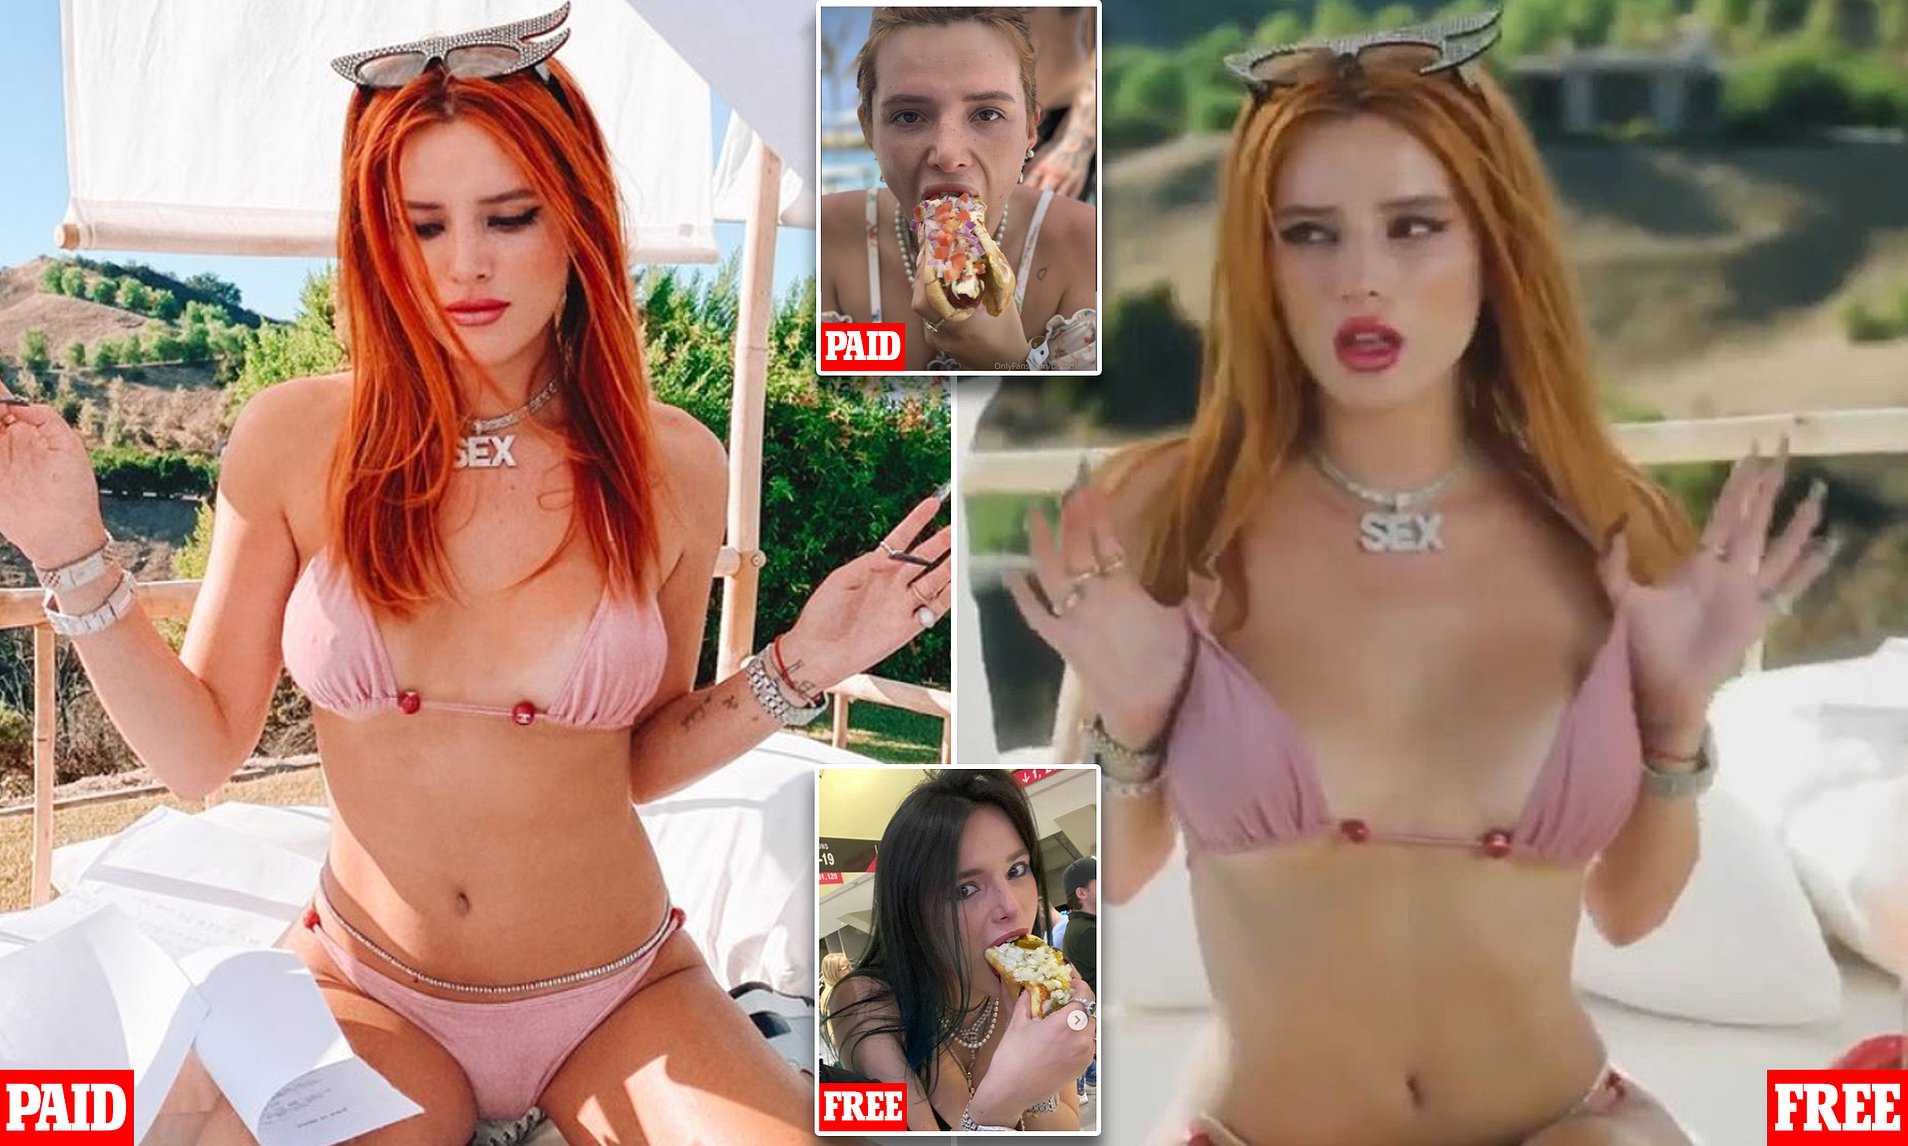 charles sheets recommends bella thorne porn lookalike pic